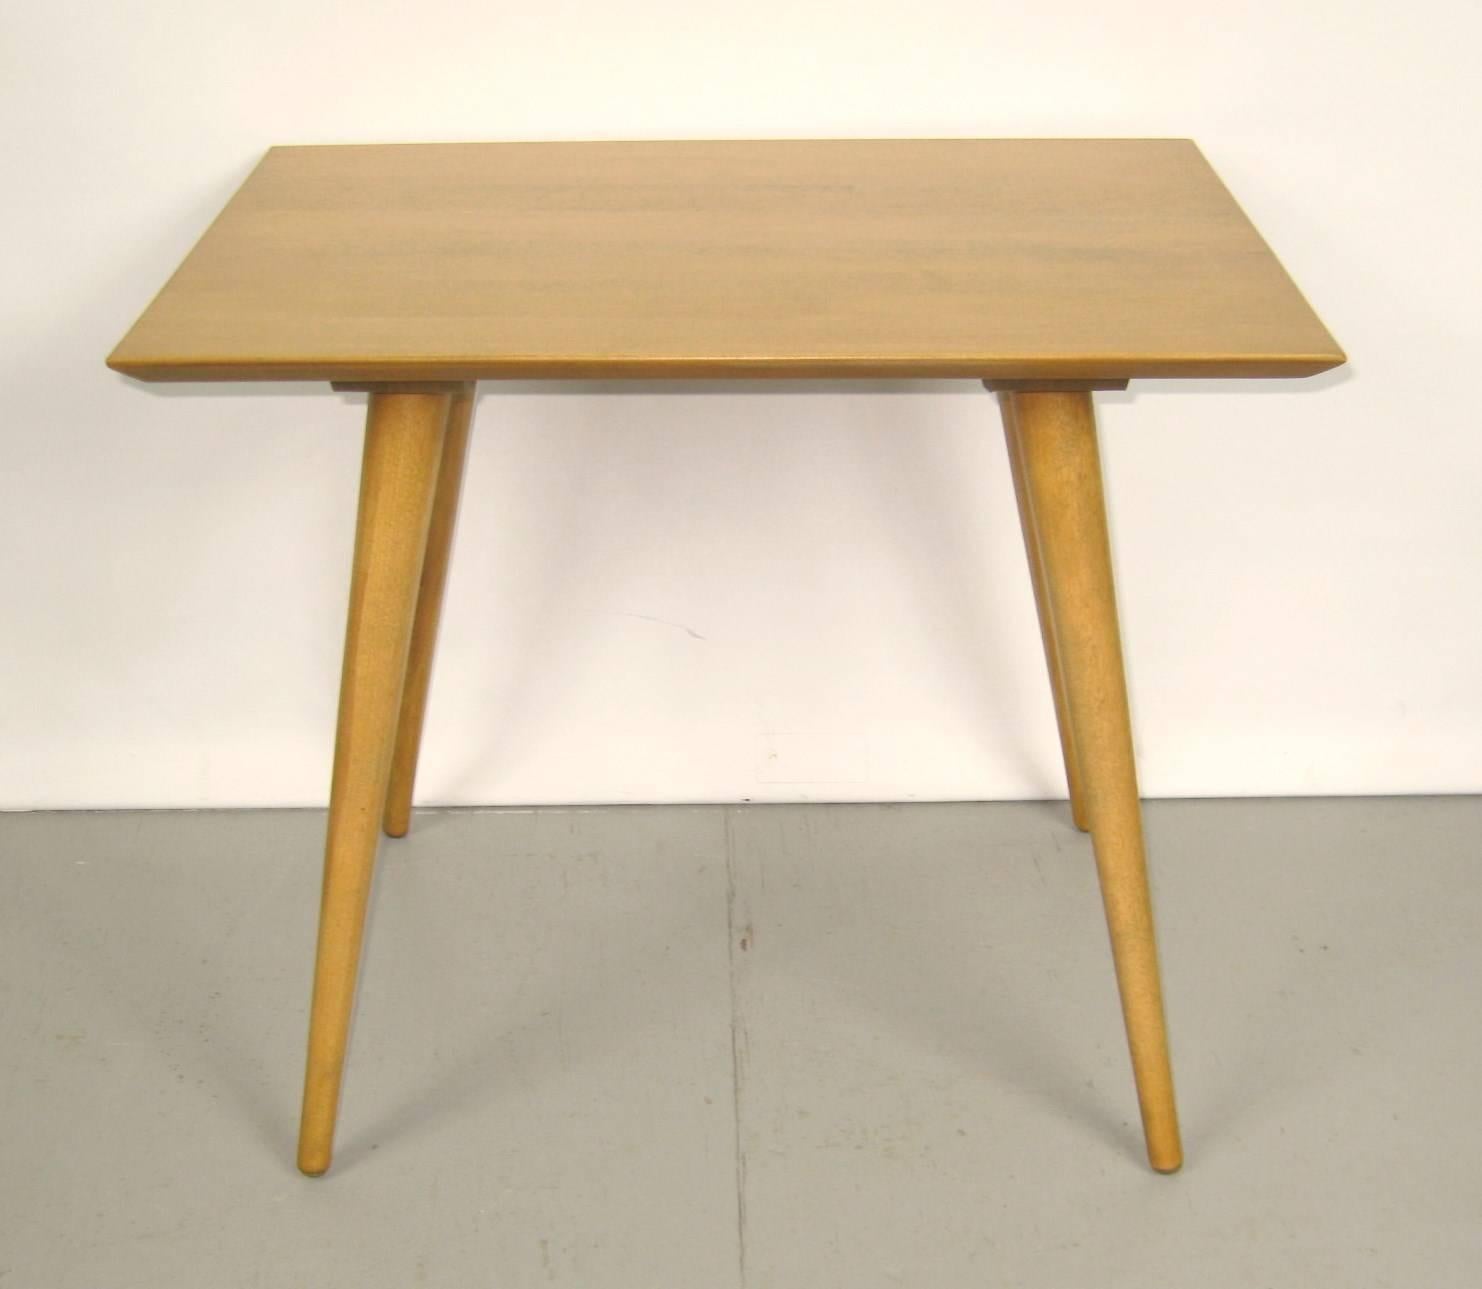 Usual size Paul McCobb for planner group occasional side table.
Measuring: 24 in W x 18 in D x 20 in H.